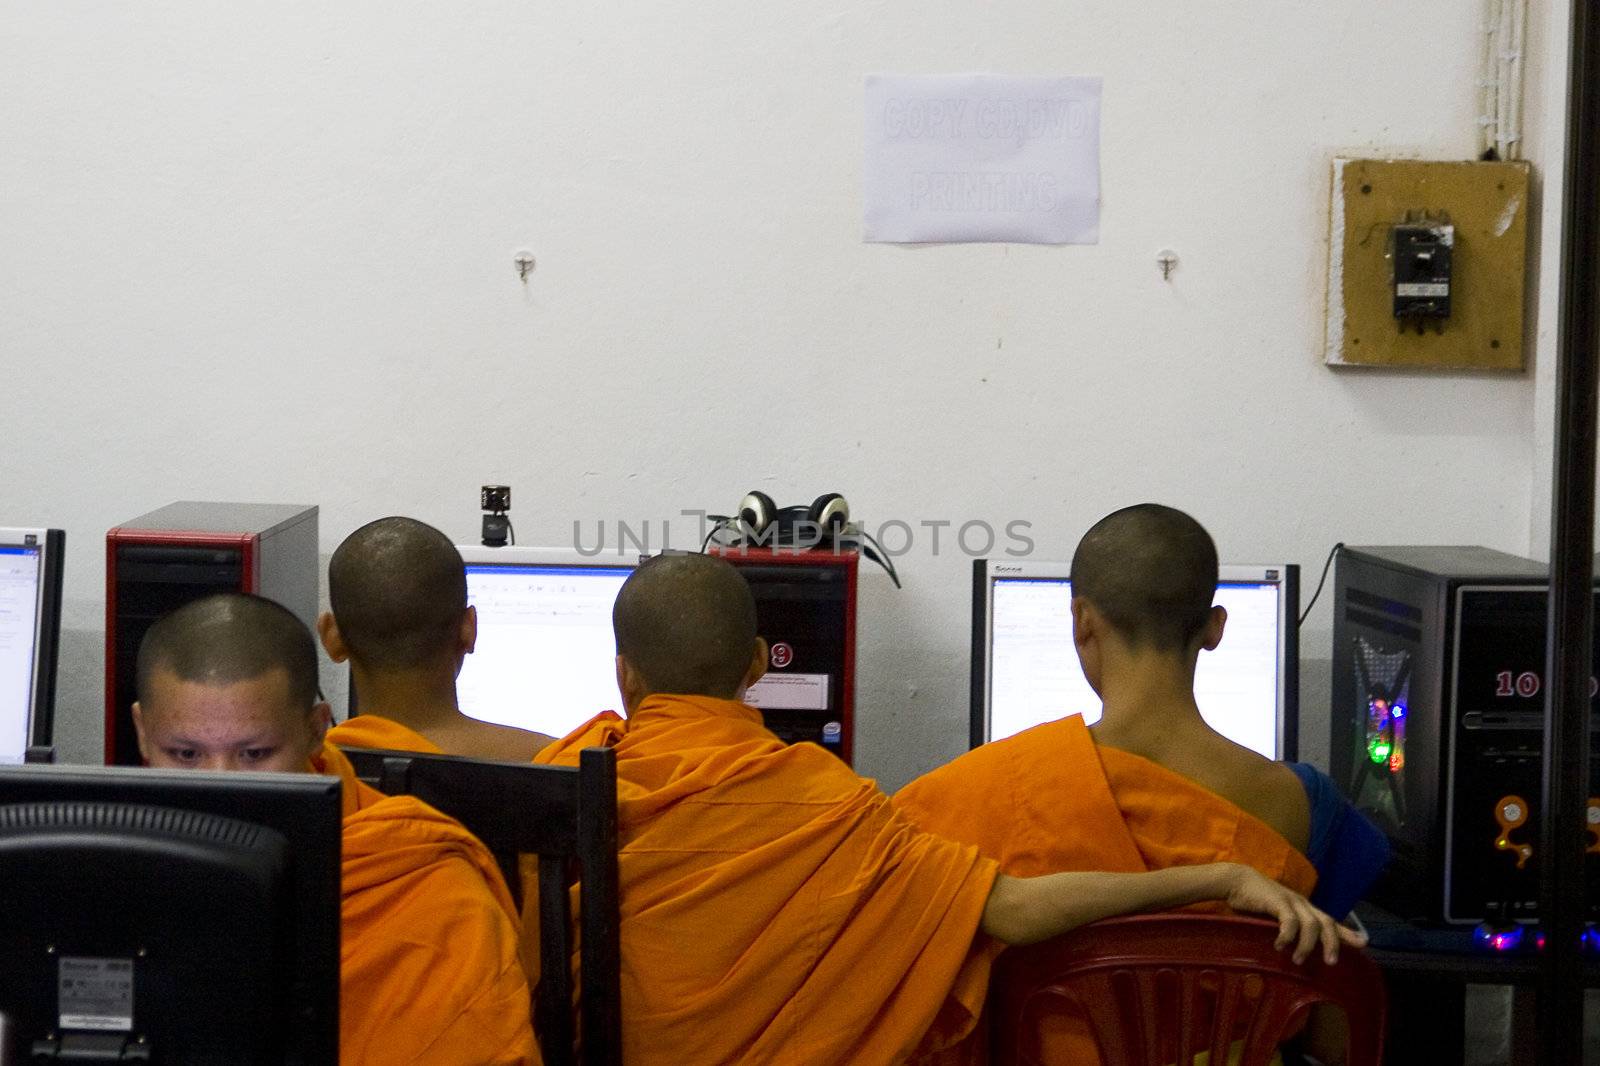 Young Monks in Luang Prabang spend their free time on the Internet. Illustrates how the new and old are getting more combined.